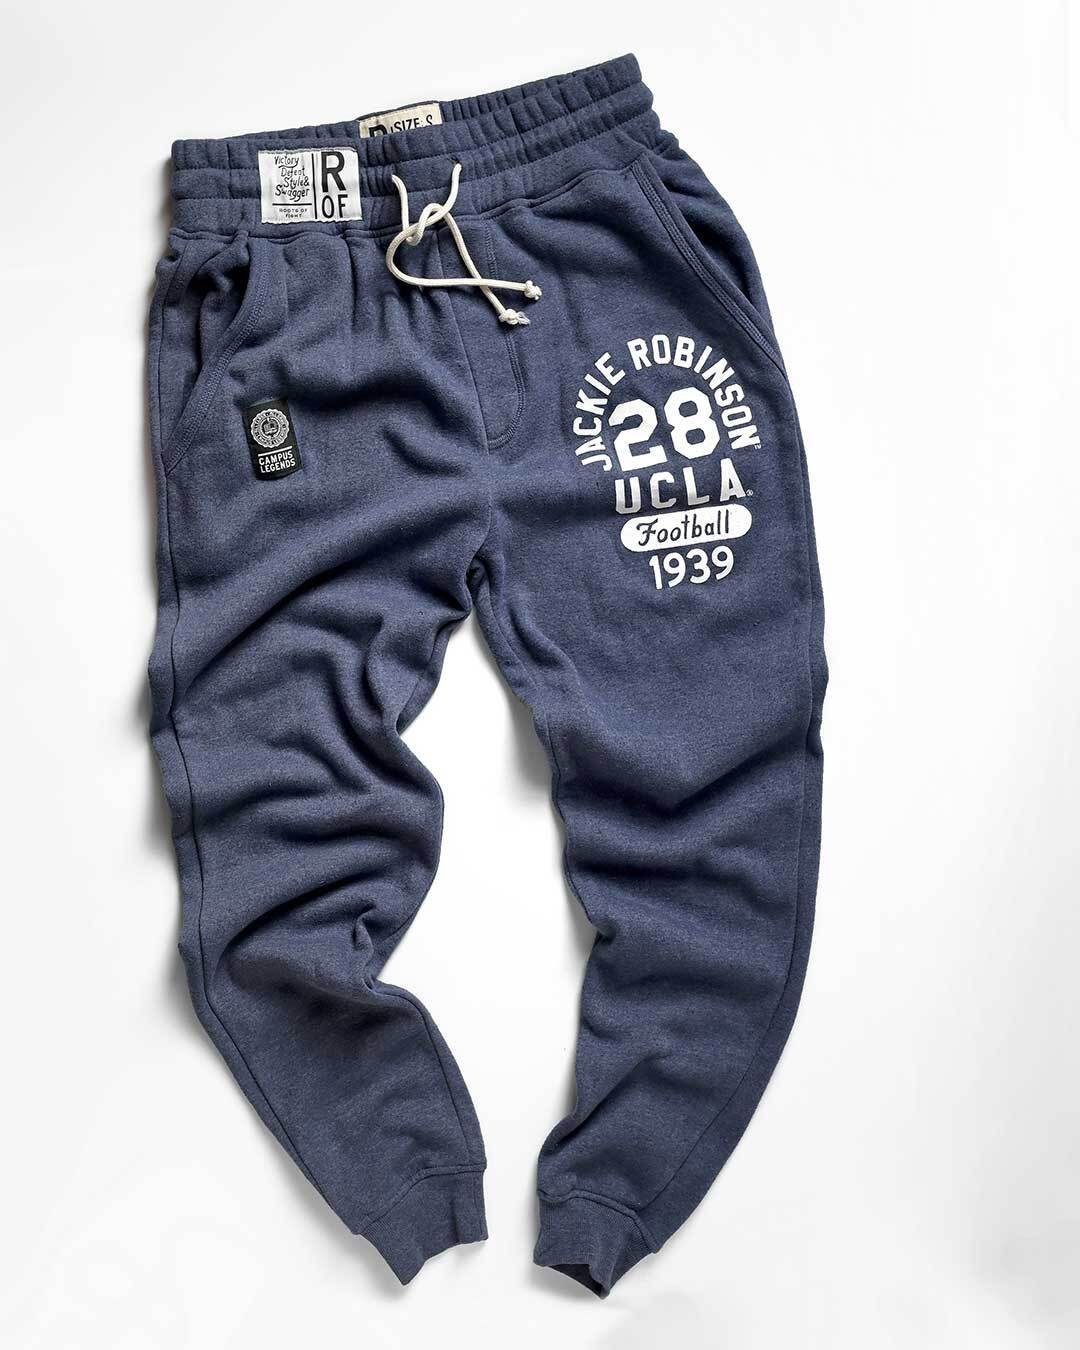 UCLA - Jackie Robinson Football Navy Sweatpants - Roots of Fight